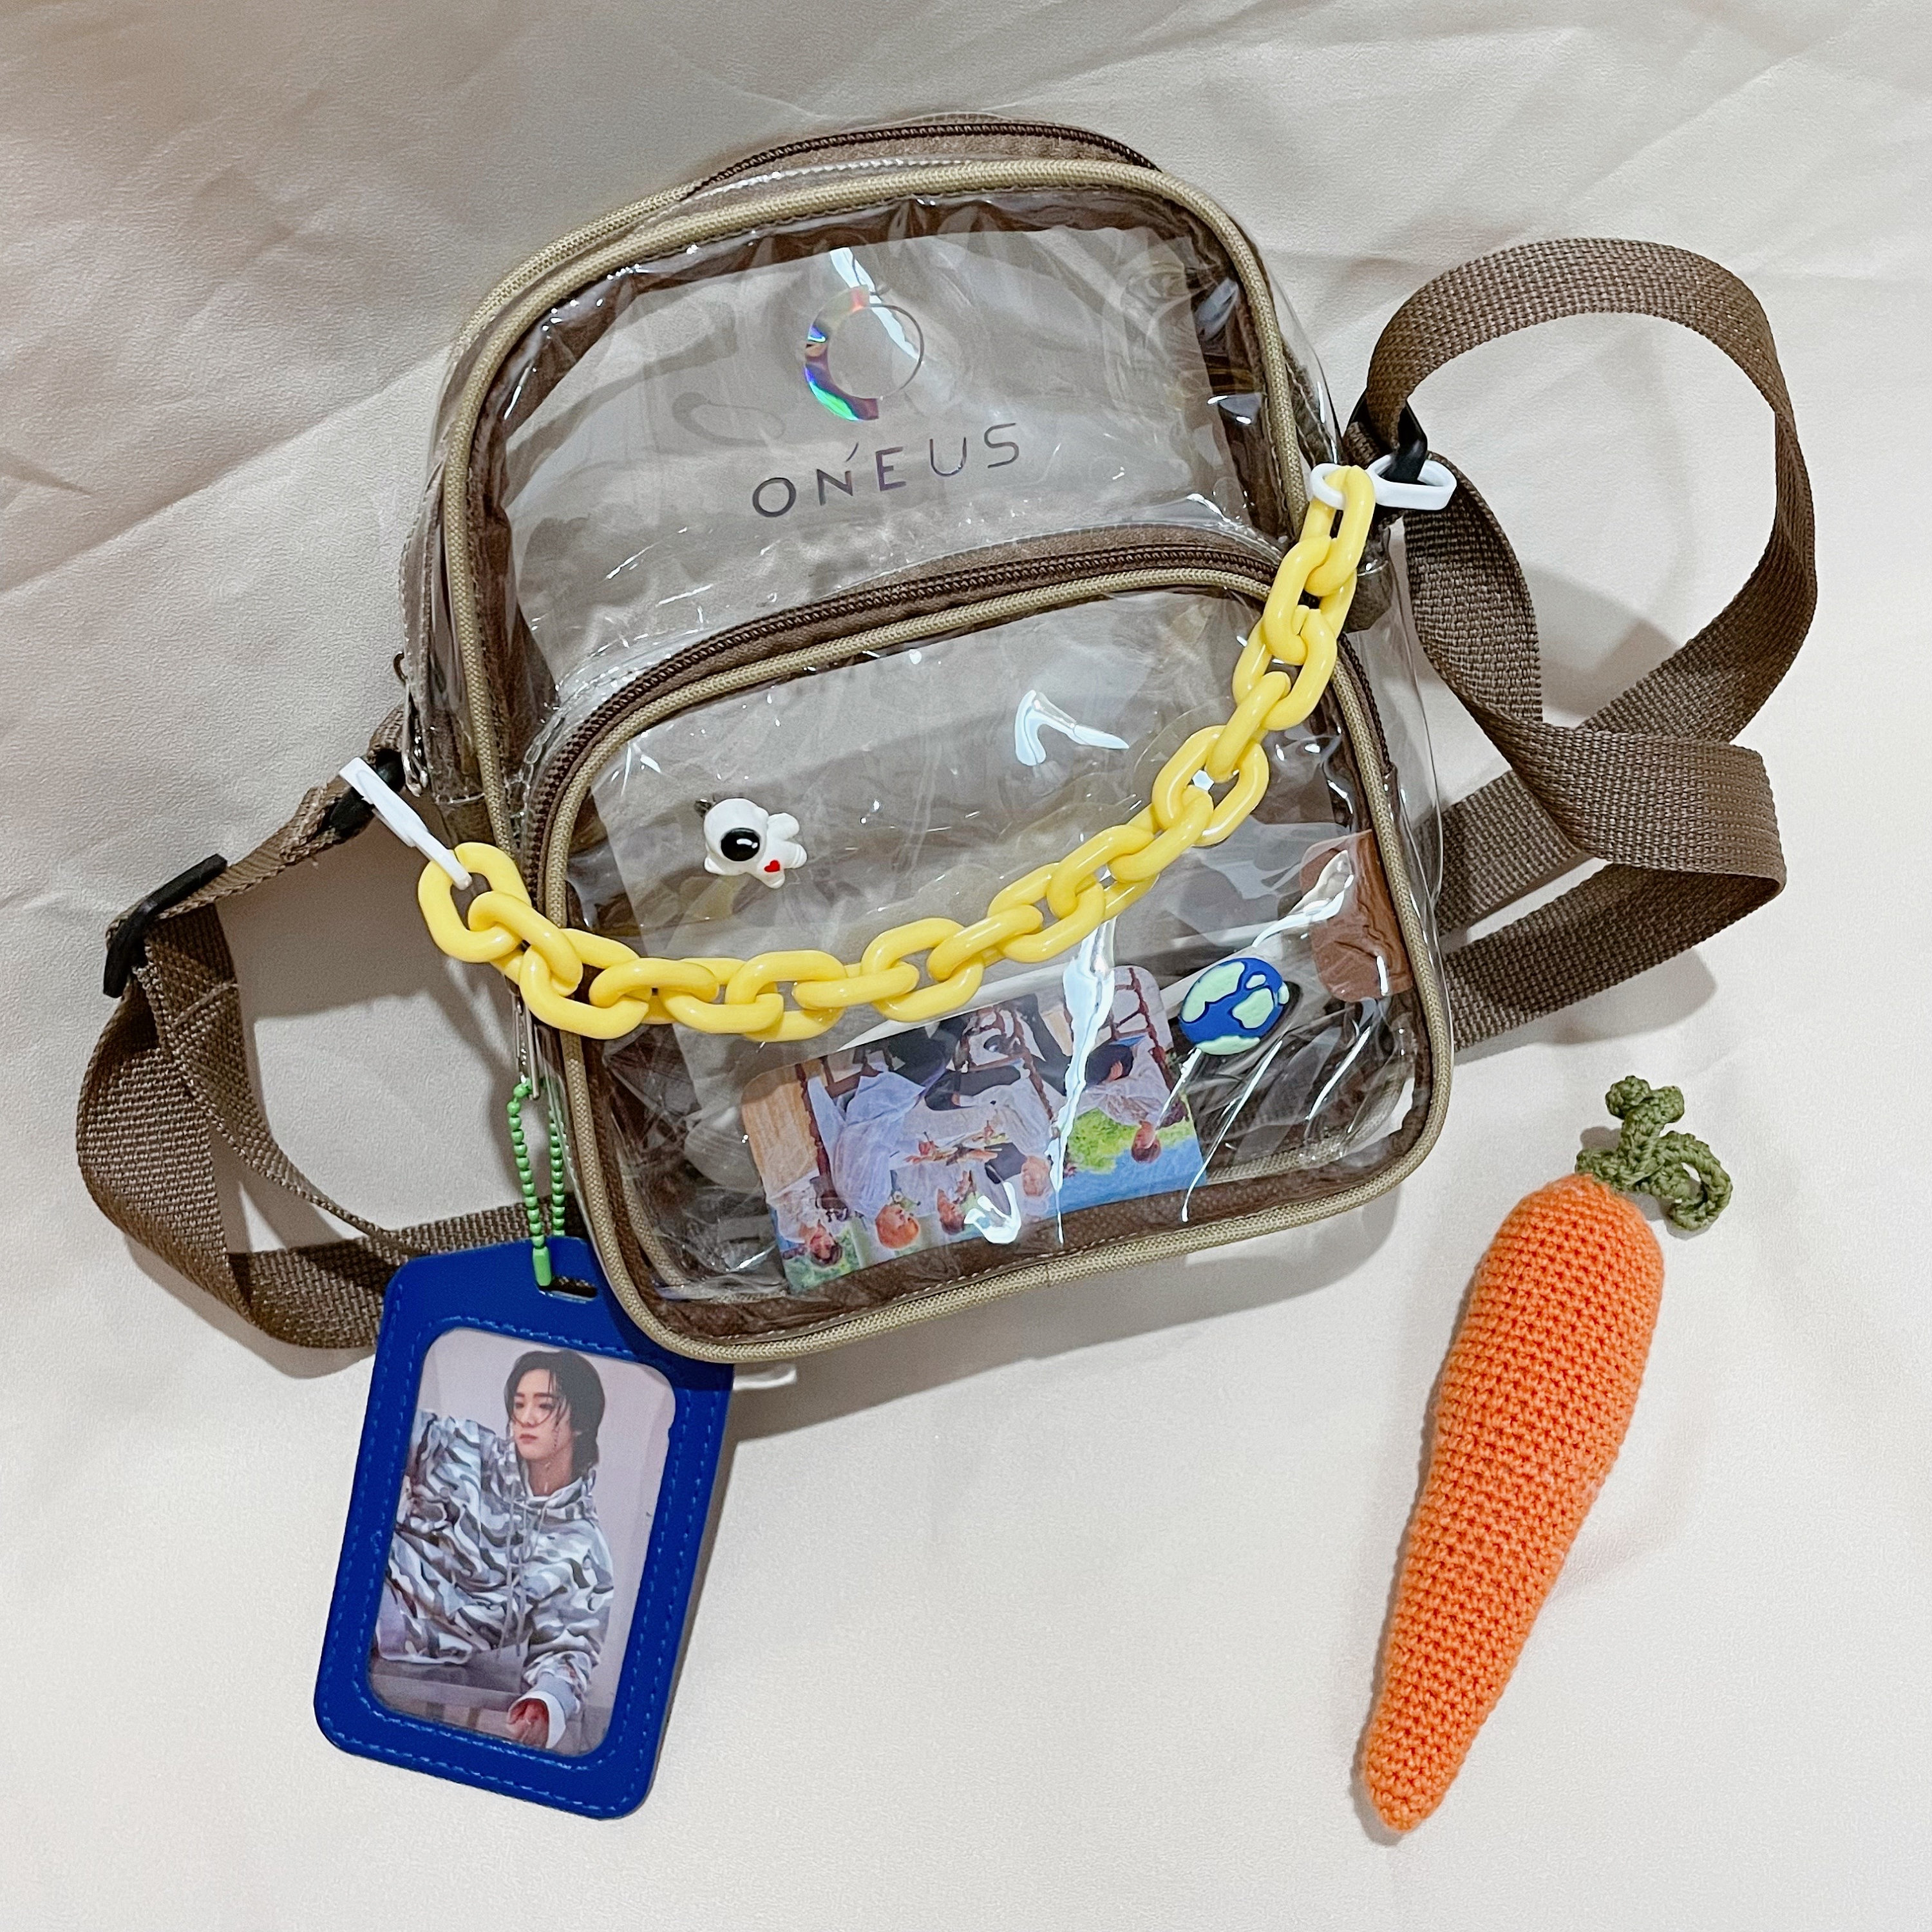 Louis Vuitton allowed the sales for BTS' Jin carrot pouch due to